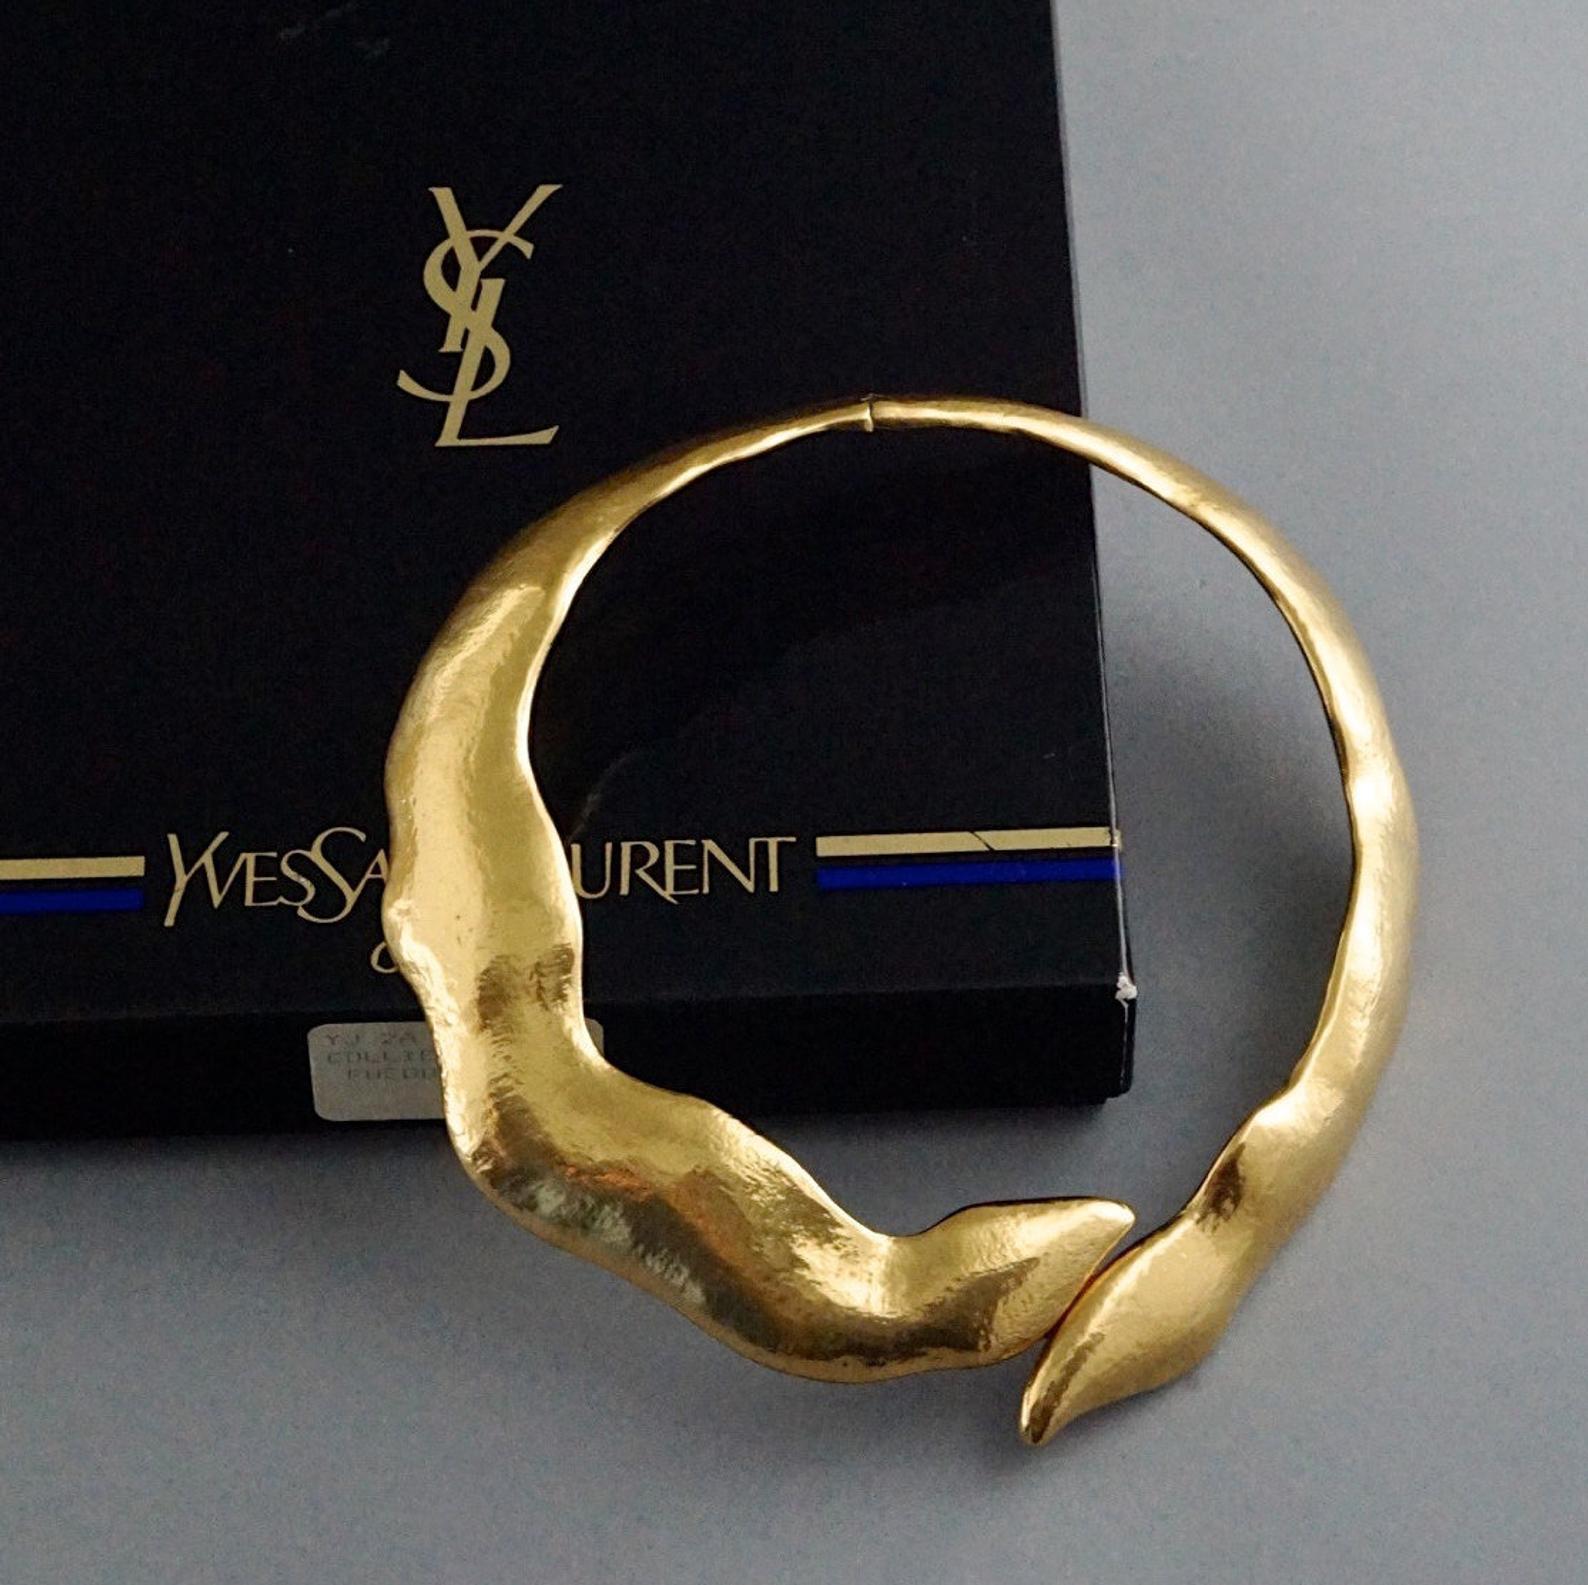 Vintage 1991 YVES SAINT LAURENT Ysl Snake Serpent Rigid Choker Necklace

Measurements:
Height: 1 3/8 inches (max)
Circumference: 14.37 inches (36.5 cm)

Features:
- 100% Authentic YVES SAINT LAURENT.
- Textured rigid collar necklace in gold tone.
-